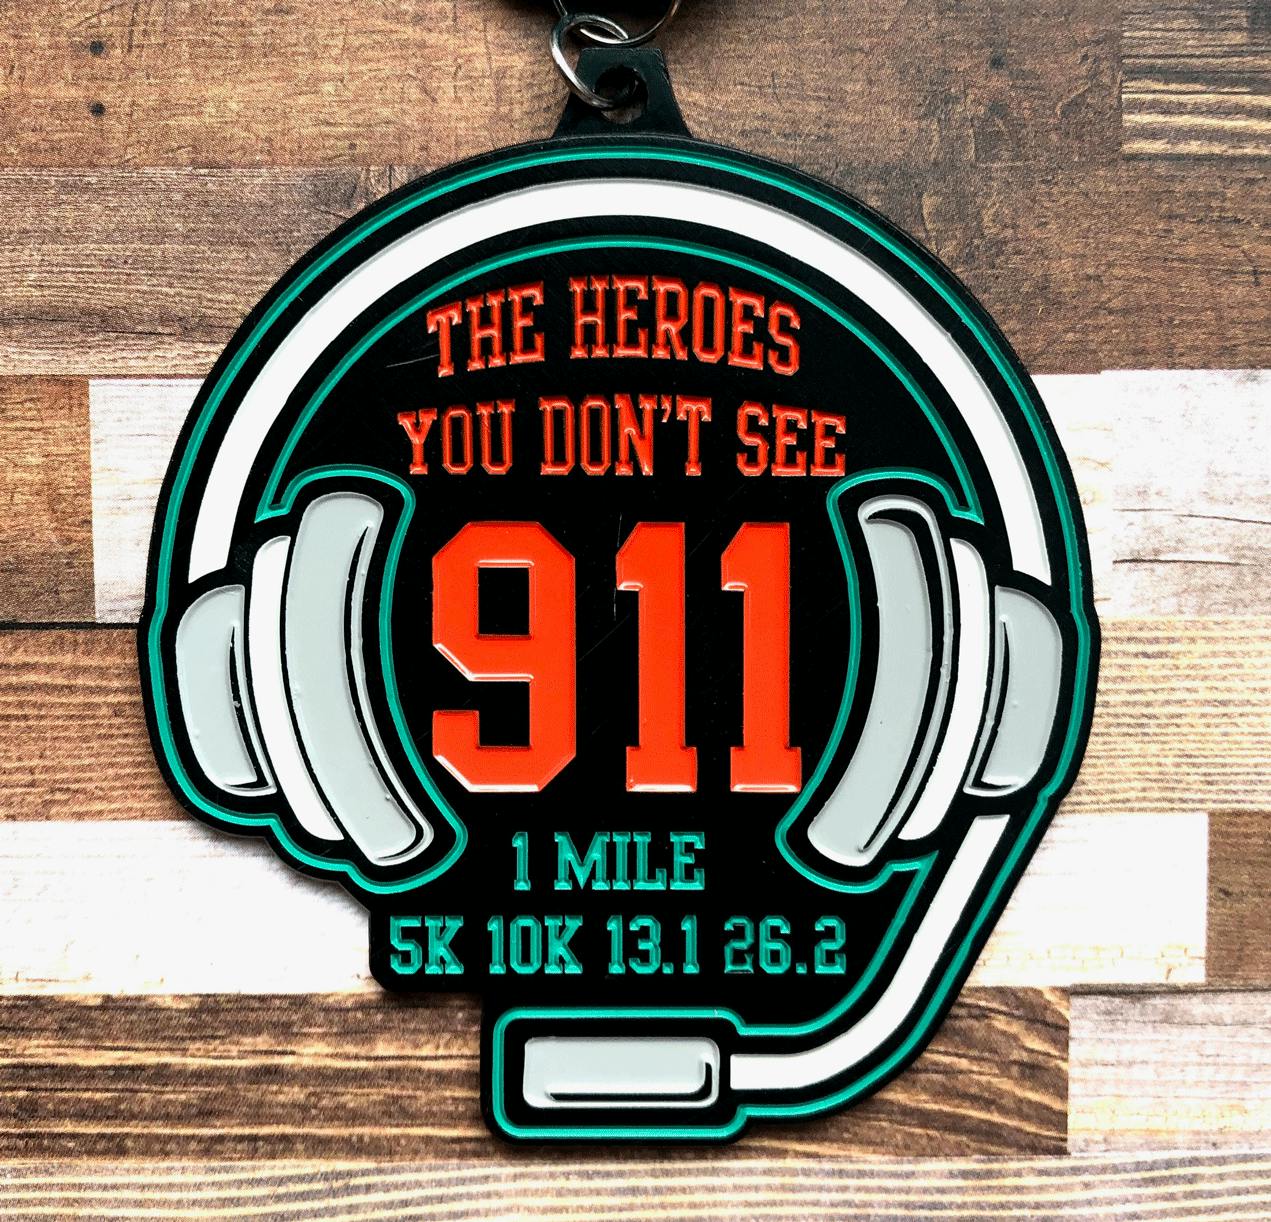 The Heroes You Don't See 1 M 5K 10K 13.1 26.2 -Winston-Salem